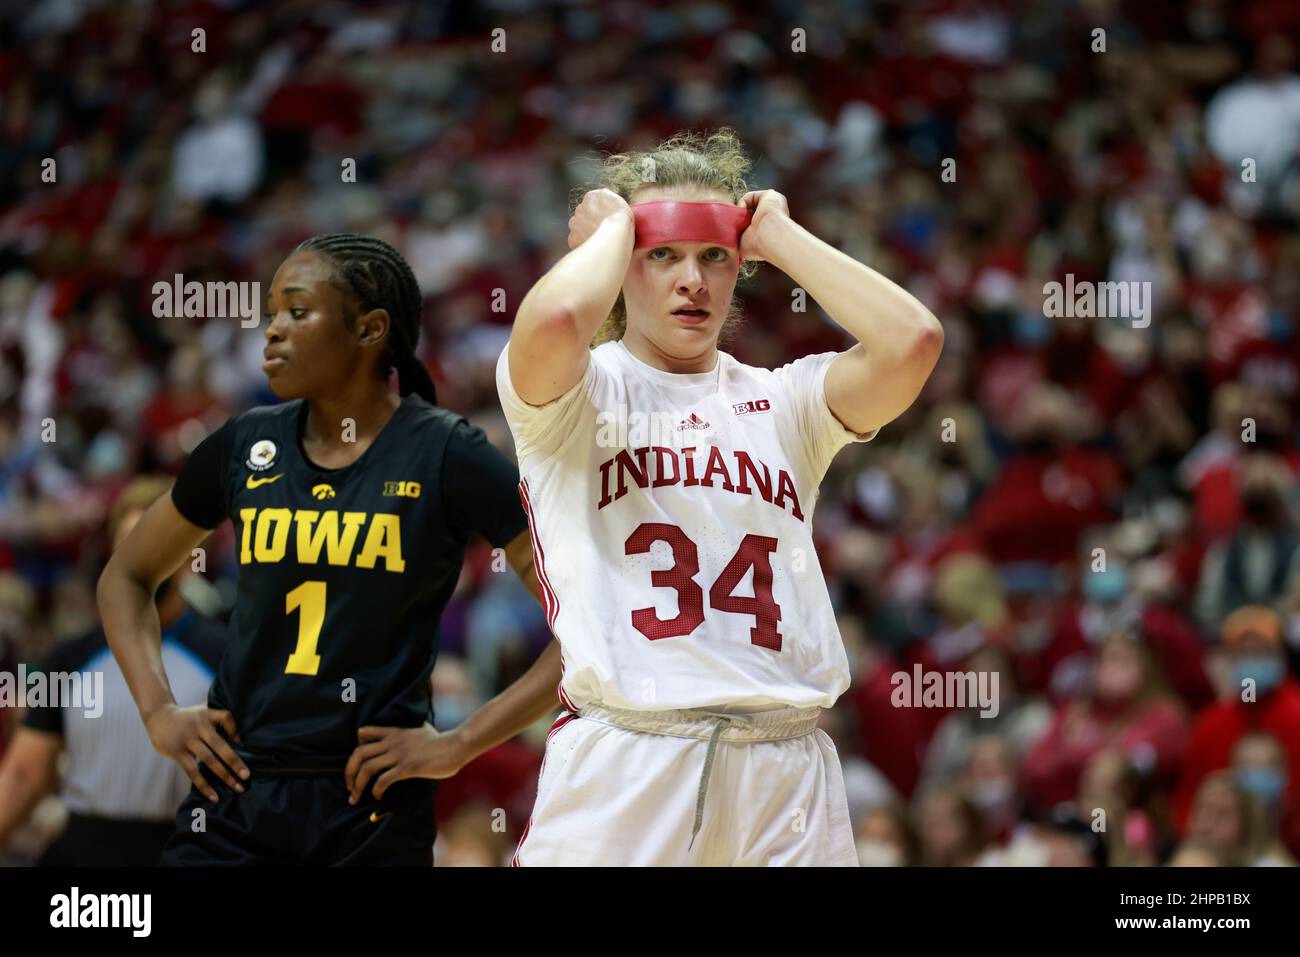 Bloomington, United States. 19th Feb, 2022. Indiana Hoosiers guard Grace Berger (34) adjusts her headband while playing Iowa during an NCAA women's basketball game in Bloomington, Ind. The Iowa Hawkeyes beat the Indiana University Hoosiers 96-91. Credit: SOPA Images Limited/Alamy Live News Stock Photo